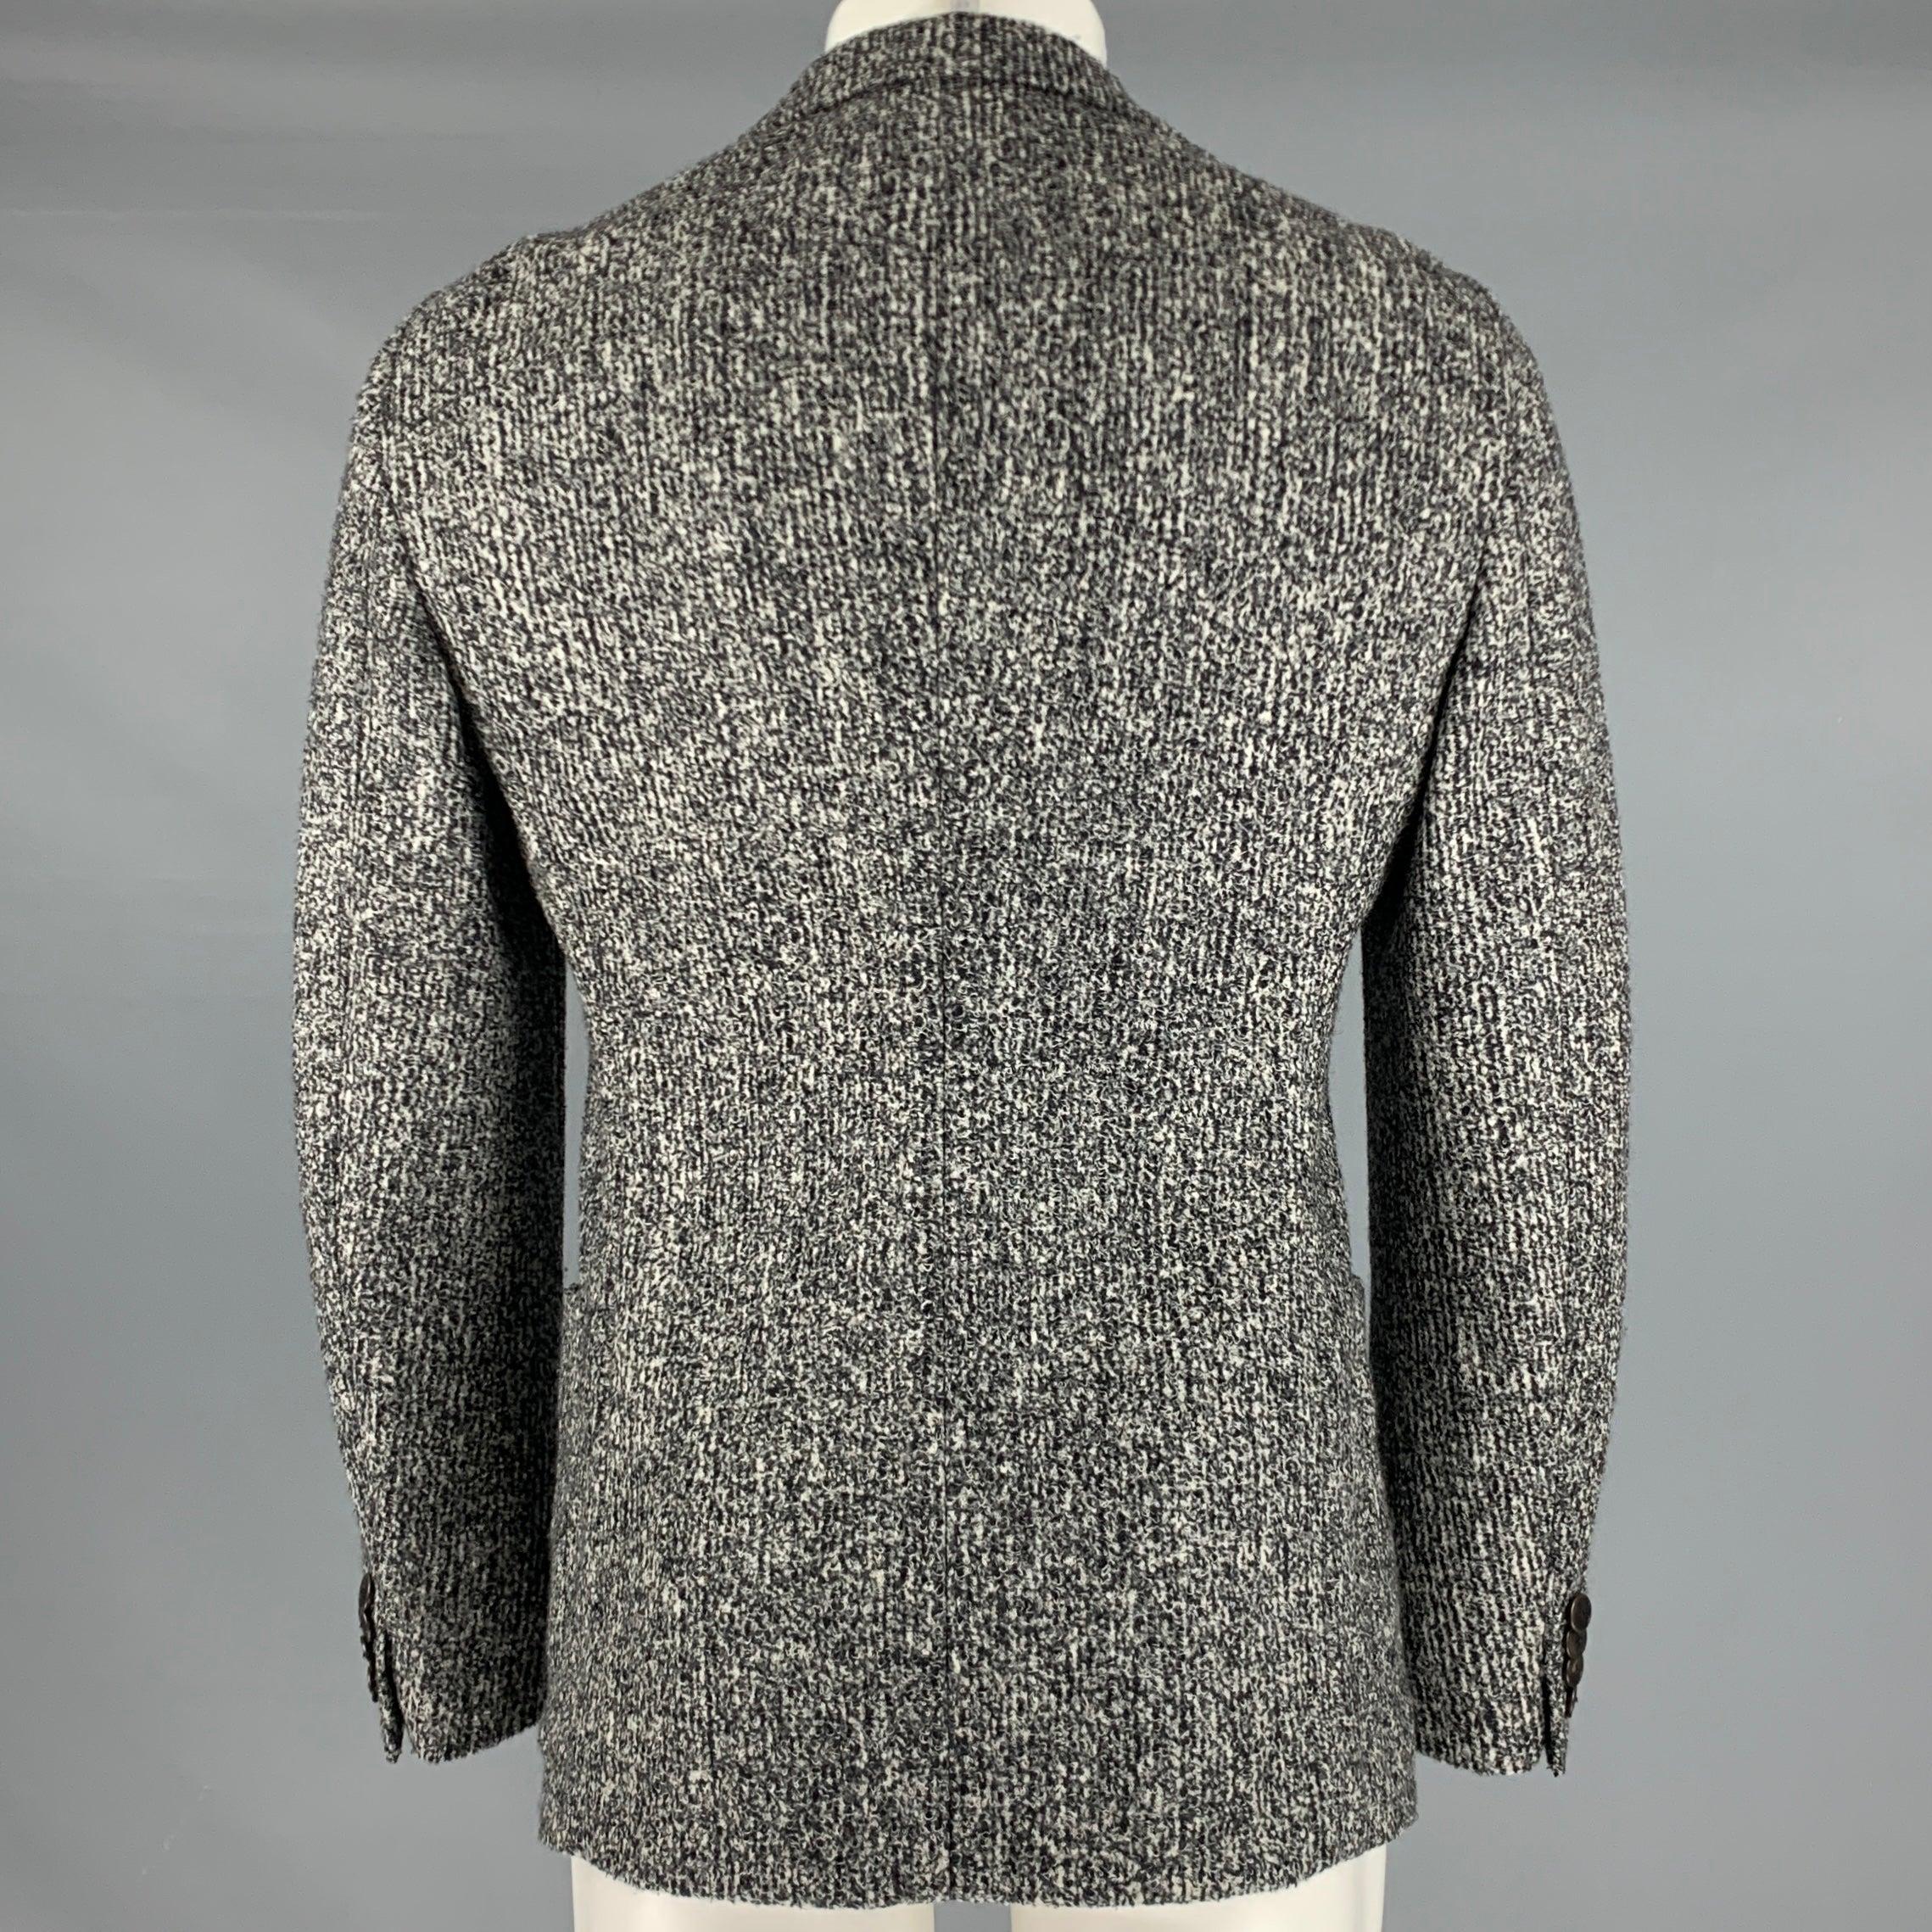 GIORGIO ARMANI Size 40 Grey Black Heather Wool Blend Sport Coat In Excellent Condition For Sale In San Francisco, CA